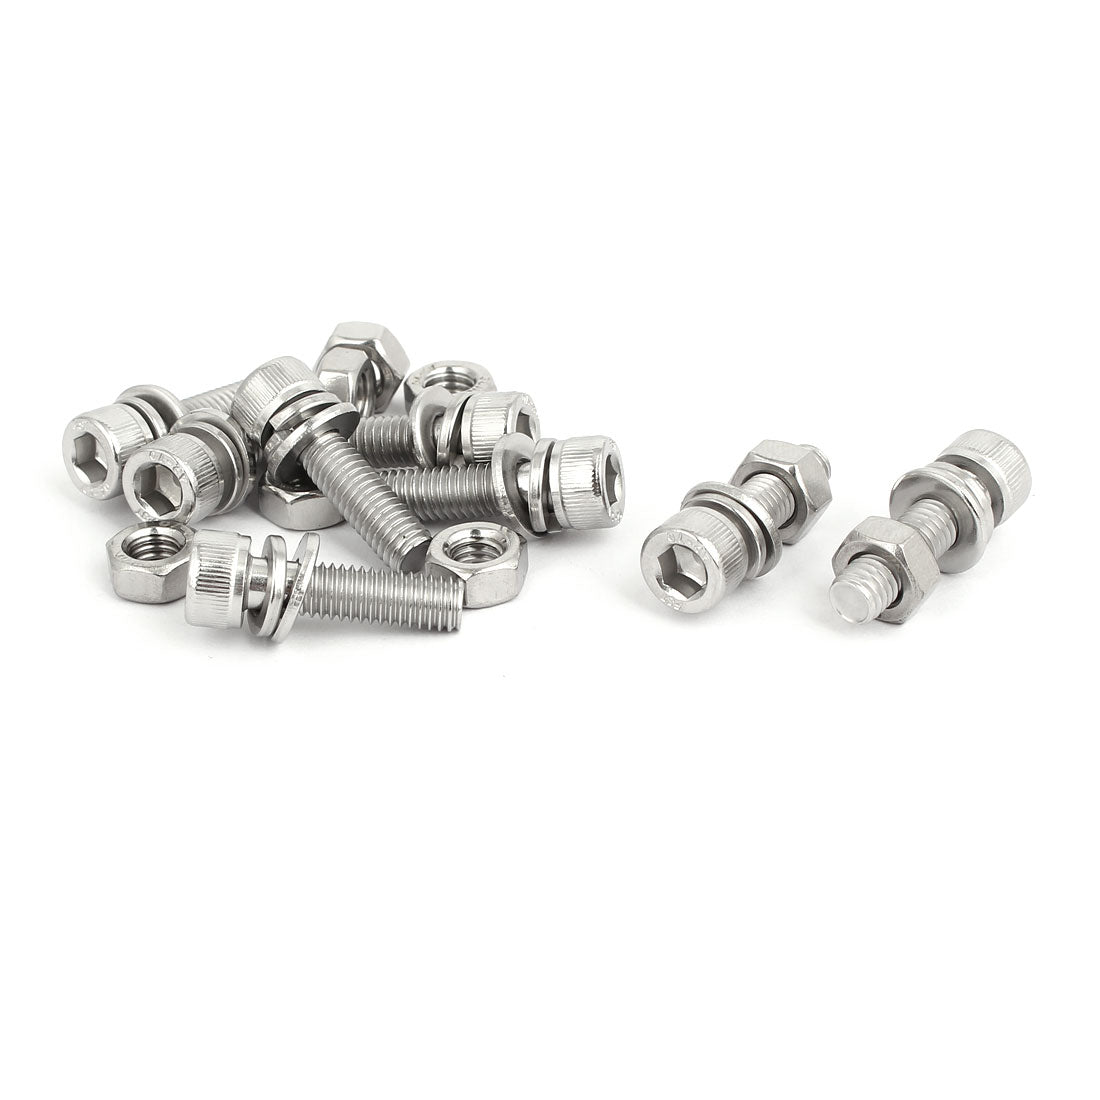 uxcell Uxcell M6x22mm 304 Stainless Steel Hex Socket Head Cap Bolt Screw Nut w Washer 8 Sets